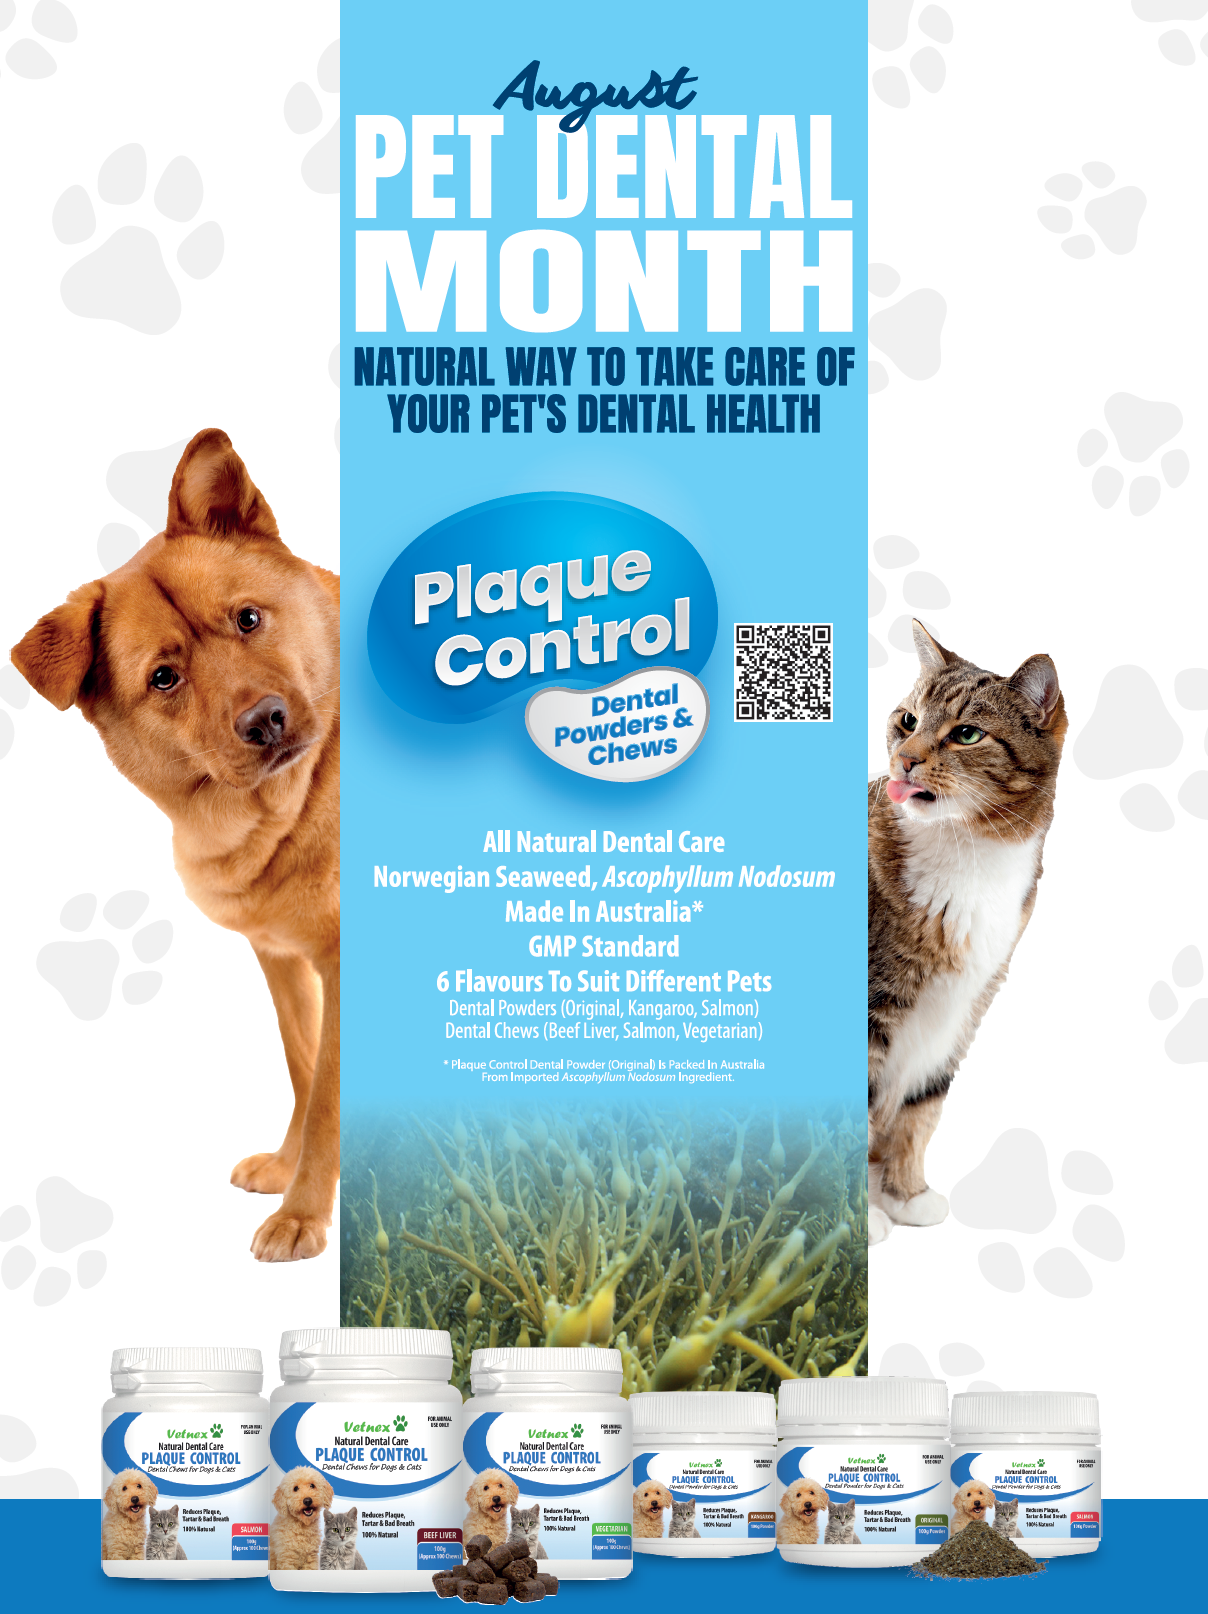 News - Vetnex natural animal care products